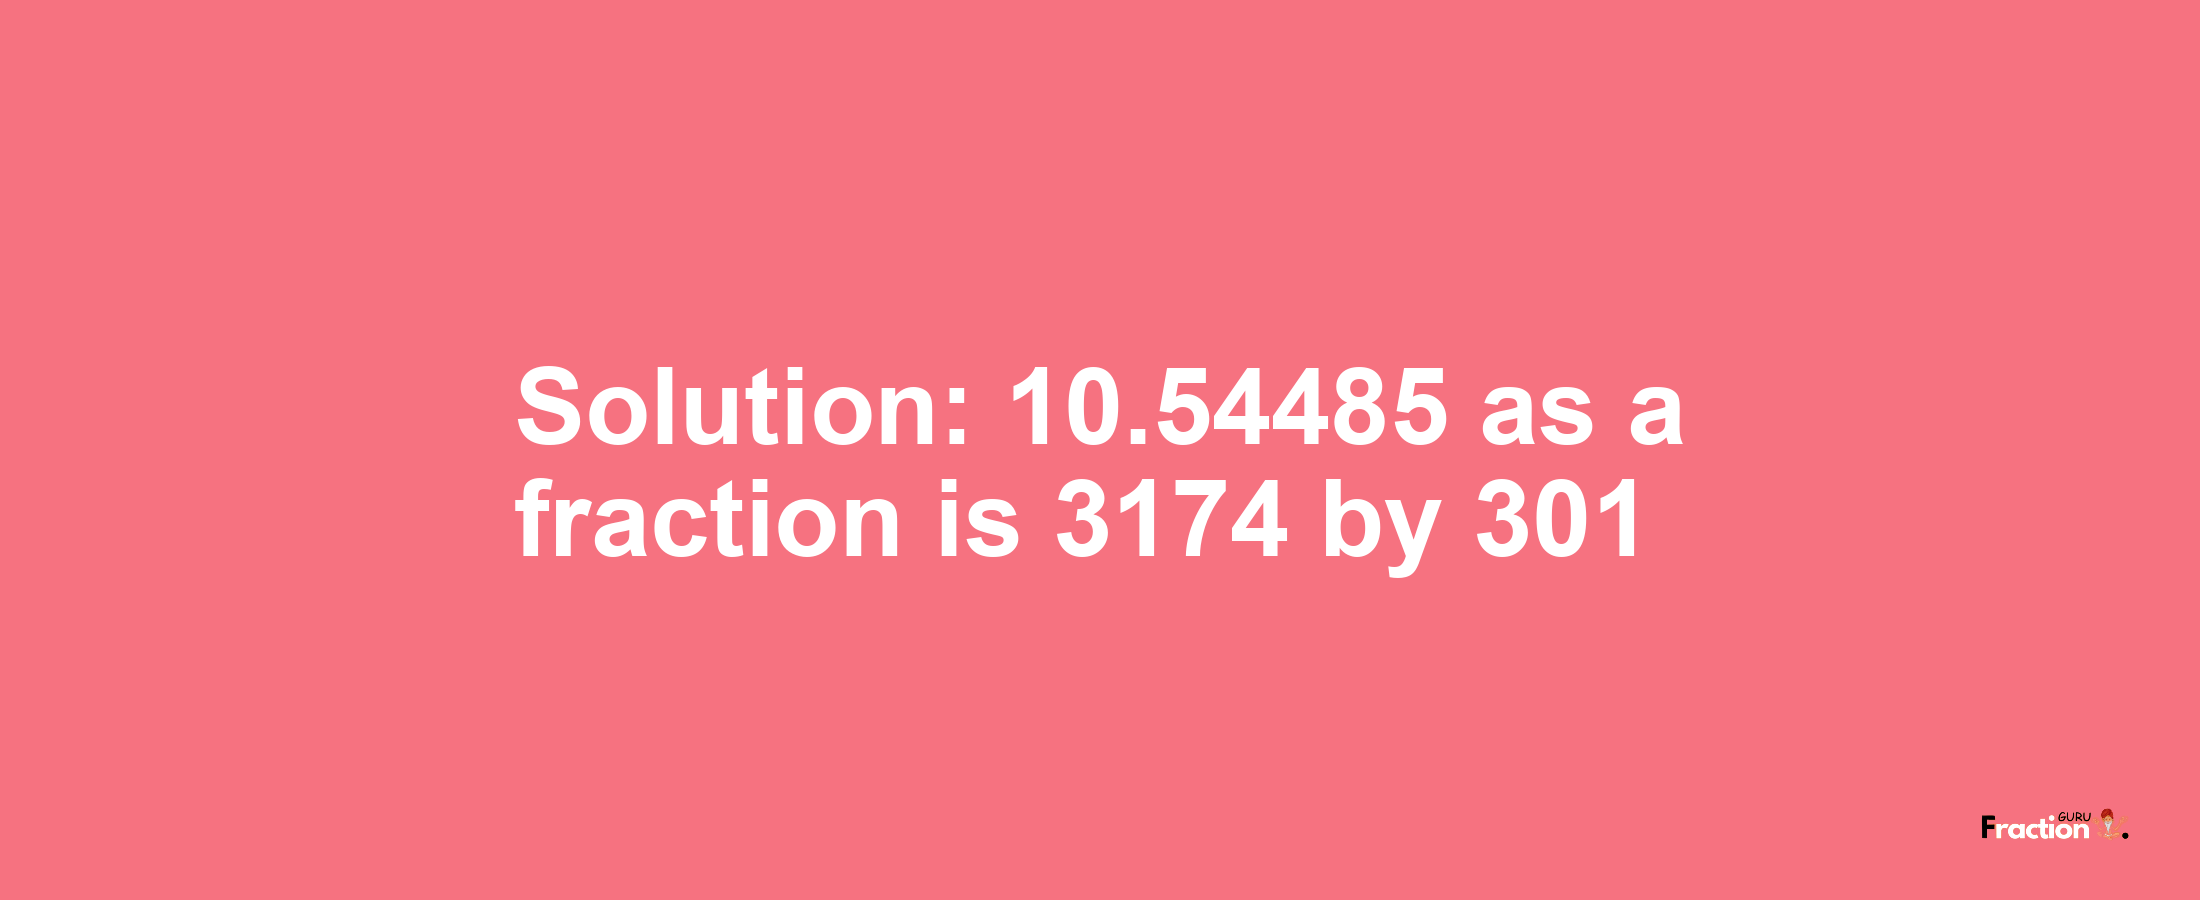 Solution:10.54485 as a fraction is 3174/301